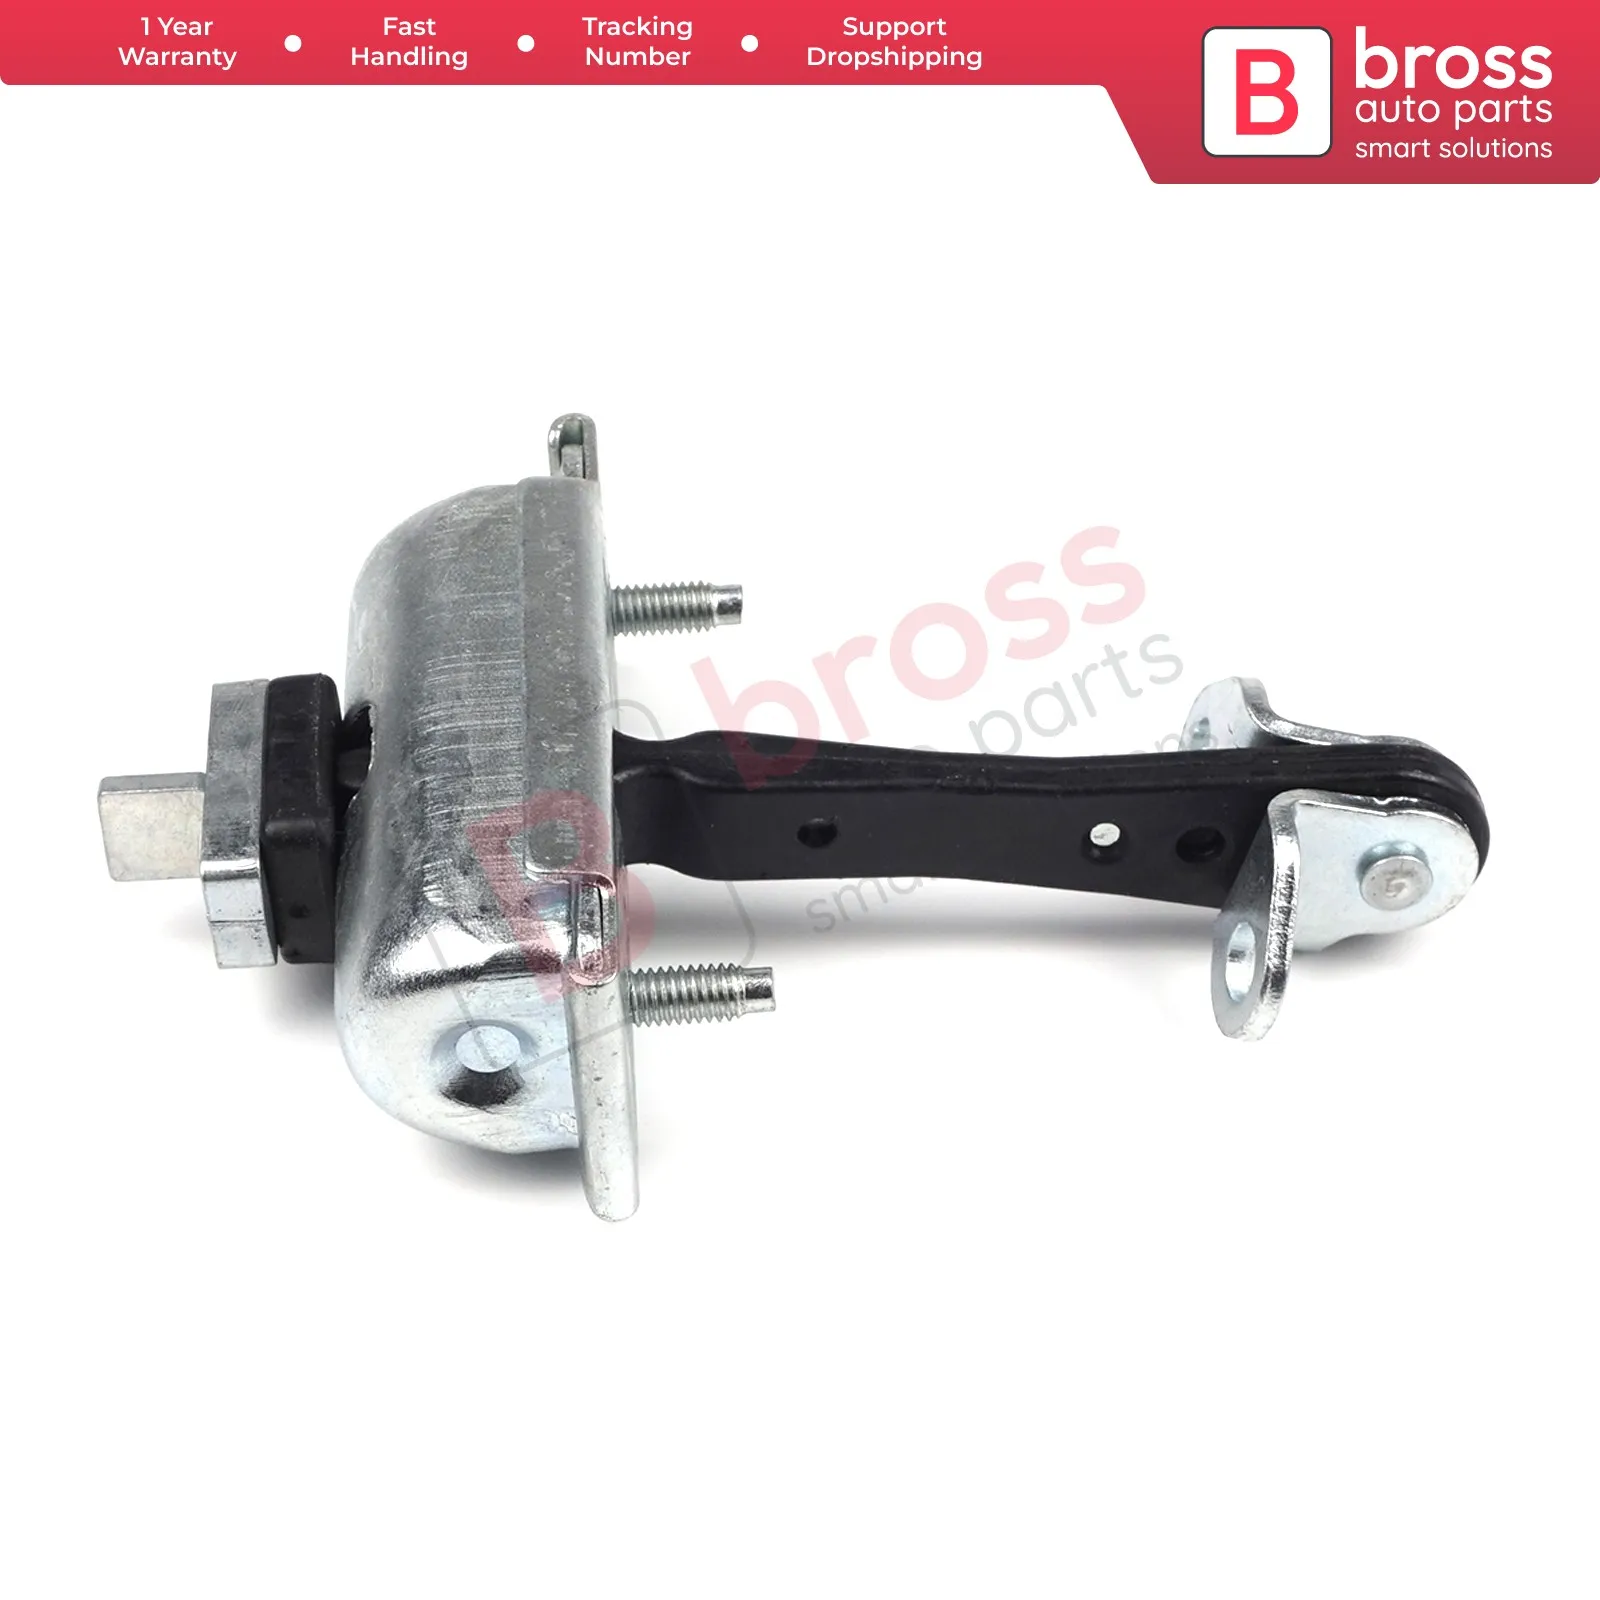 

Bross Auto Parts BDP733 Front Door Hinge Stop Check Strap Limiter 6C1AV23500AC for Ford Transit 2006-2017 Ship From Turkey